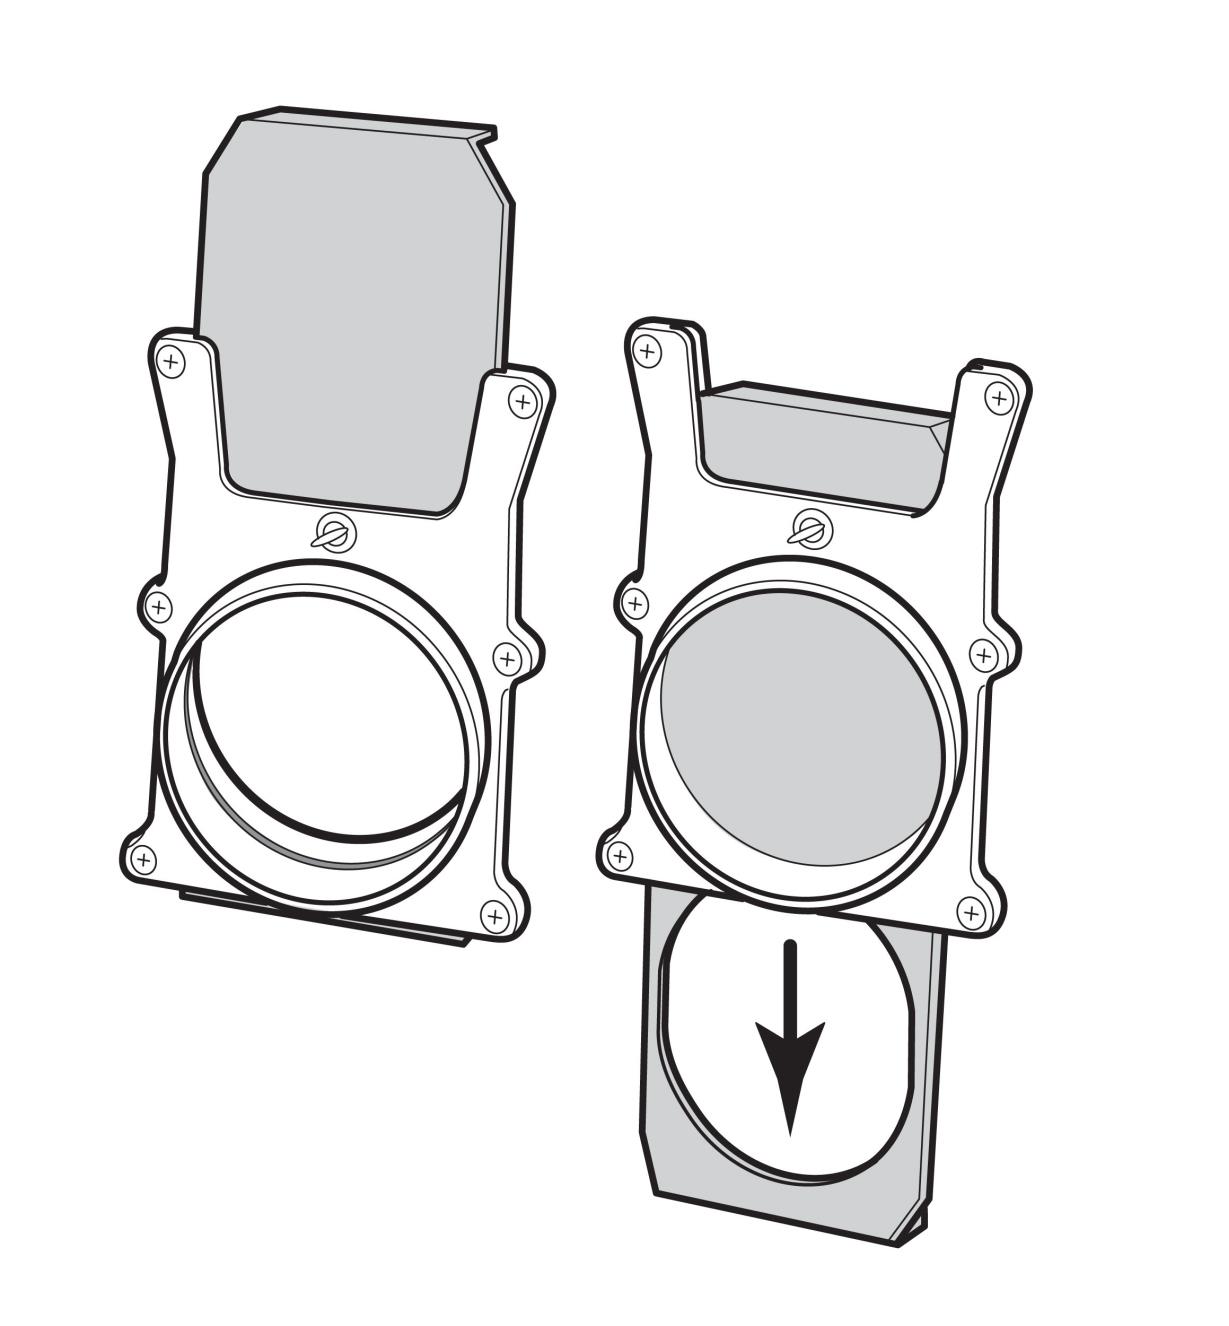 Illustration of Self-Cleaning Blast Gates in open and closed positions